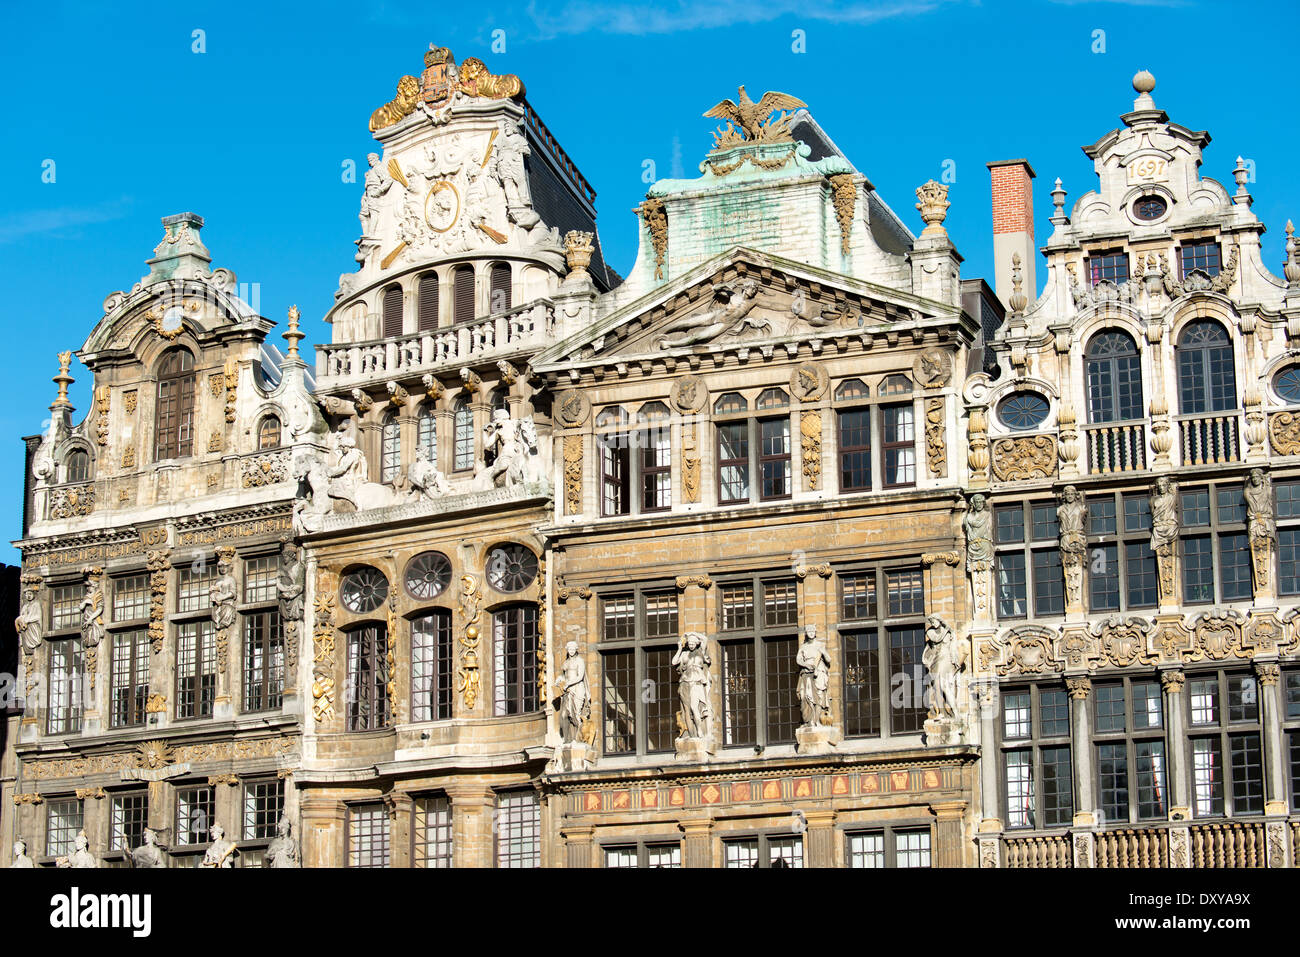 Historic guidhalls lining the northwest side of the Grand Place (La Grand-Place), a UNESCO World Heritage Site in central Brussels, Belgium. Lined with ornate, historic buildings, the cobblestone square is the primary tourist attraction in Brussels. Stock Photo